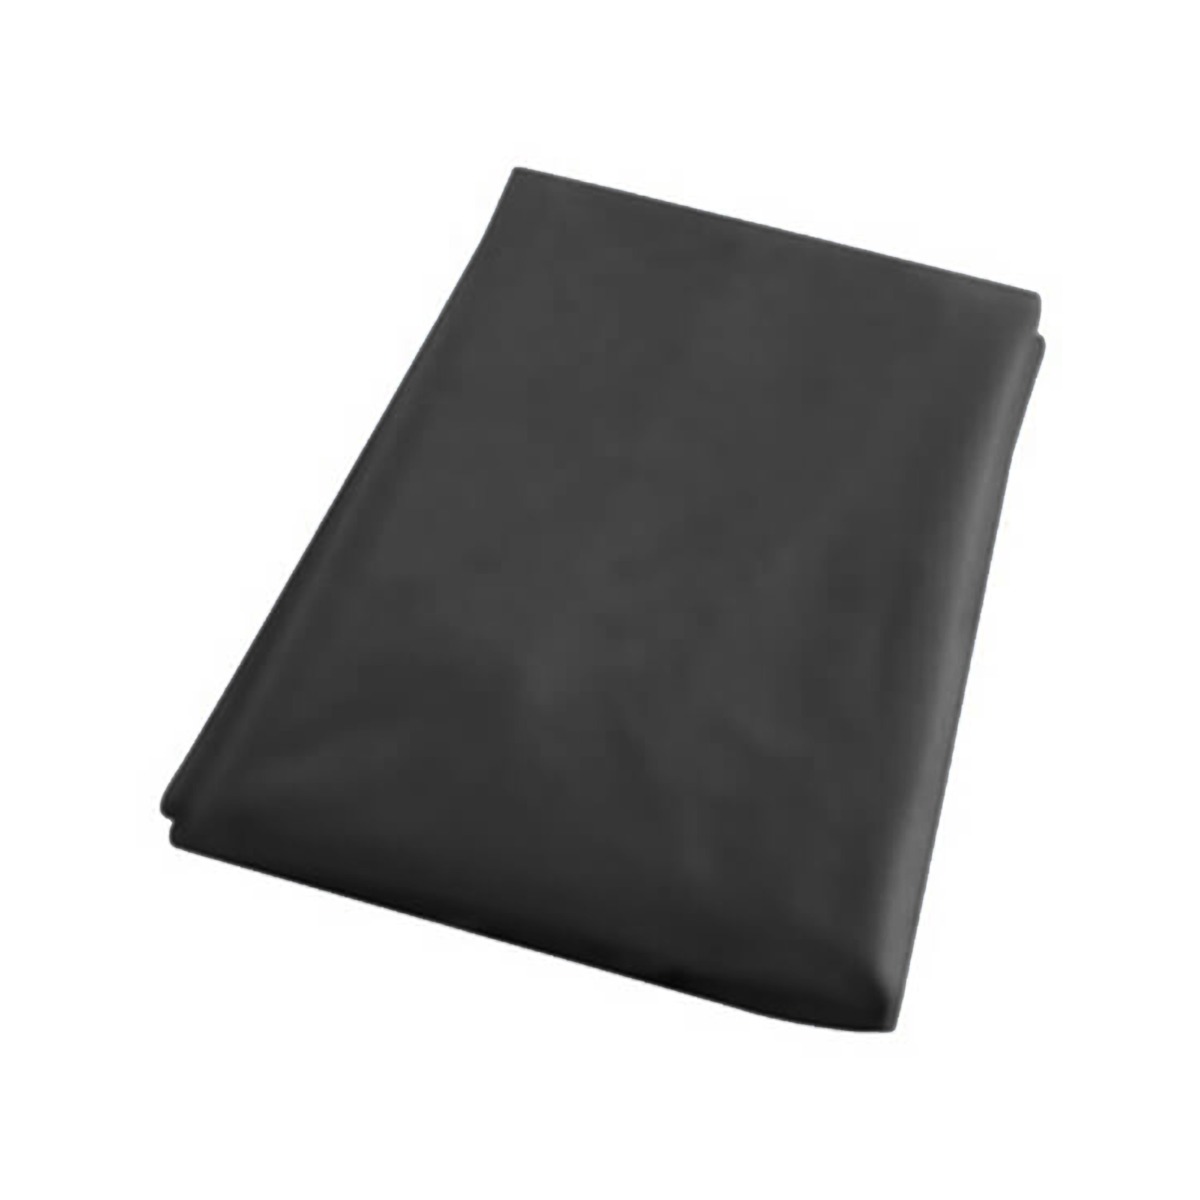 life Palermo Ampel-Sonnenschirm 3x3/2,5x2,5 cover inkl. stok